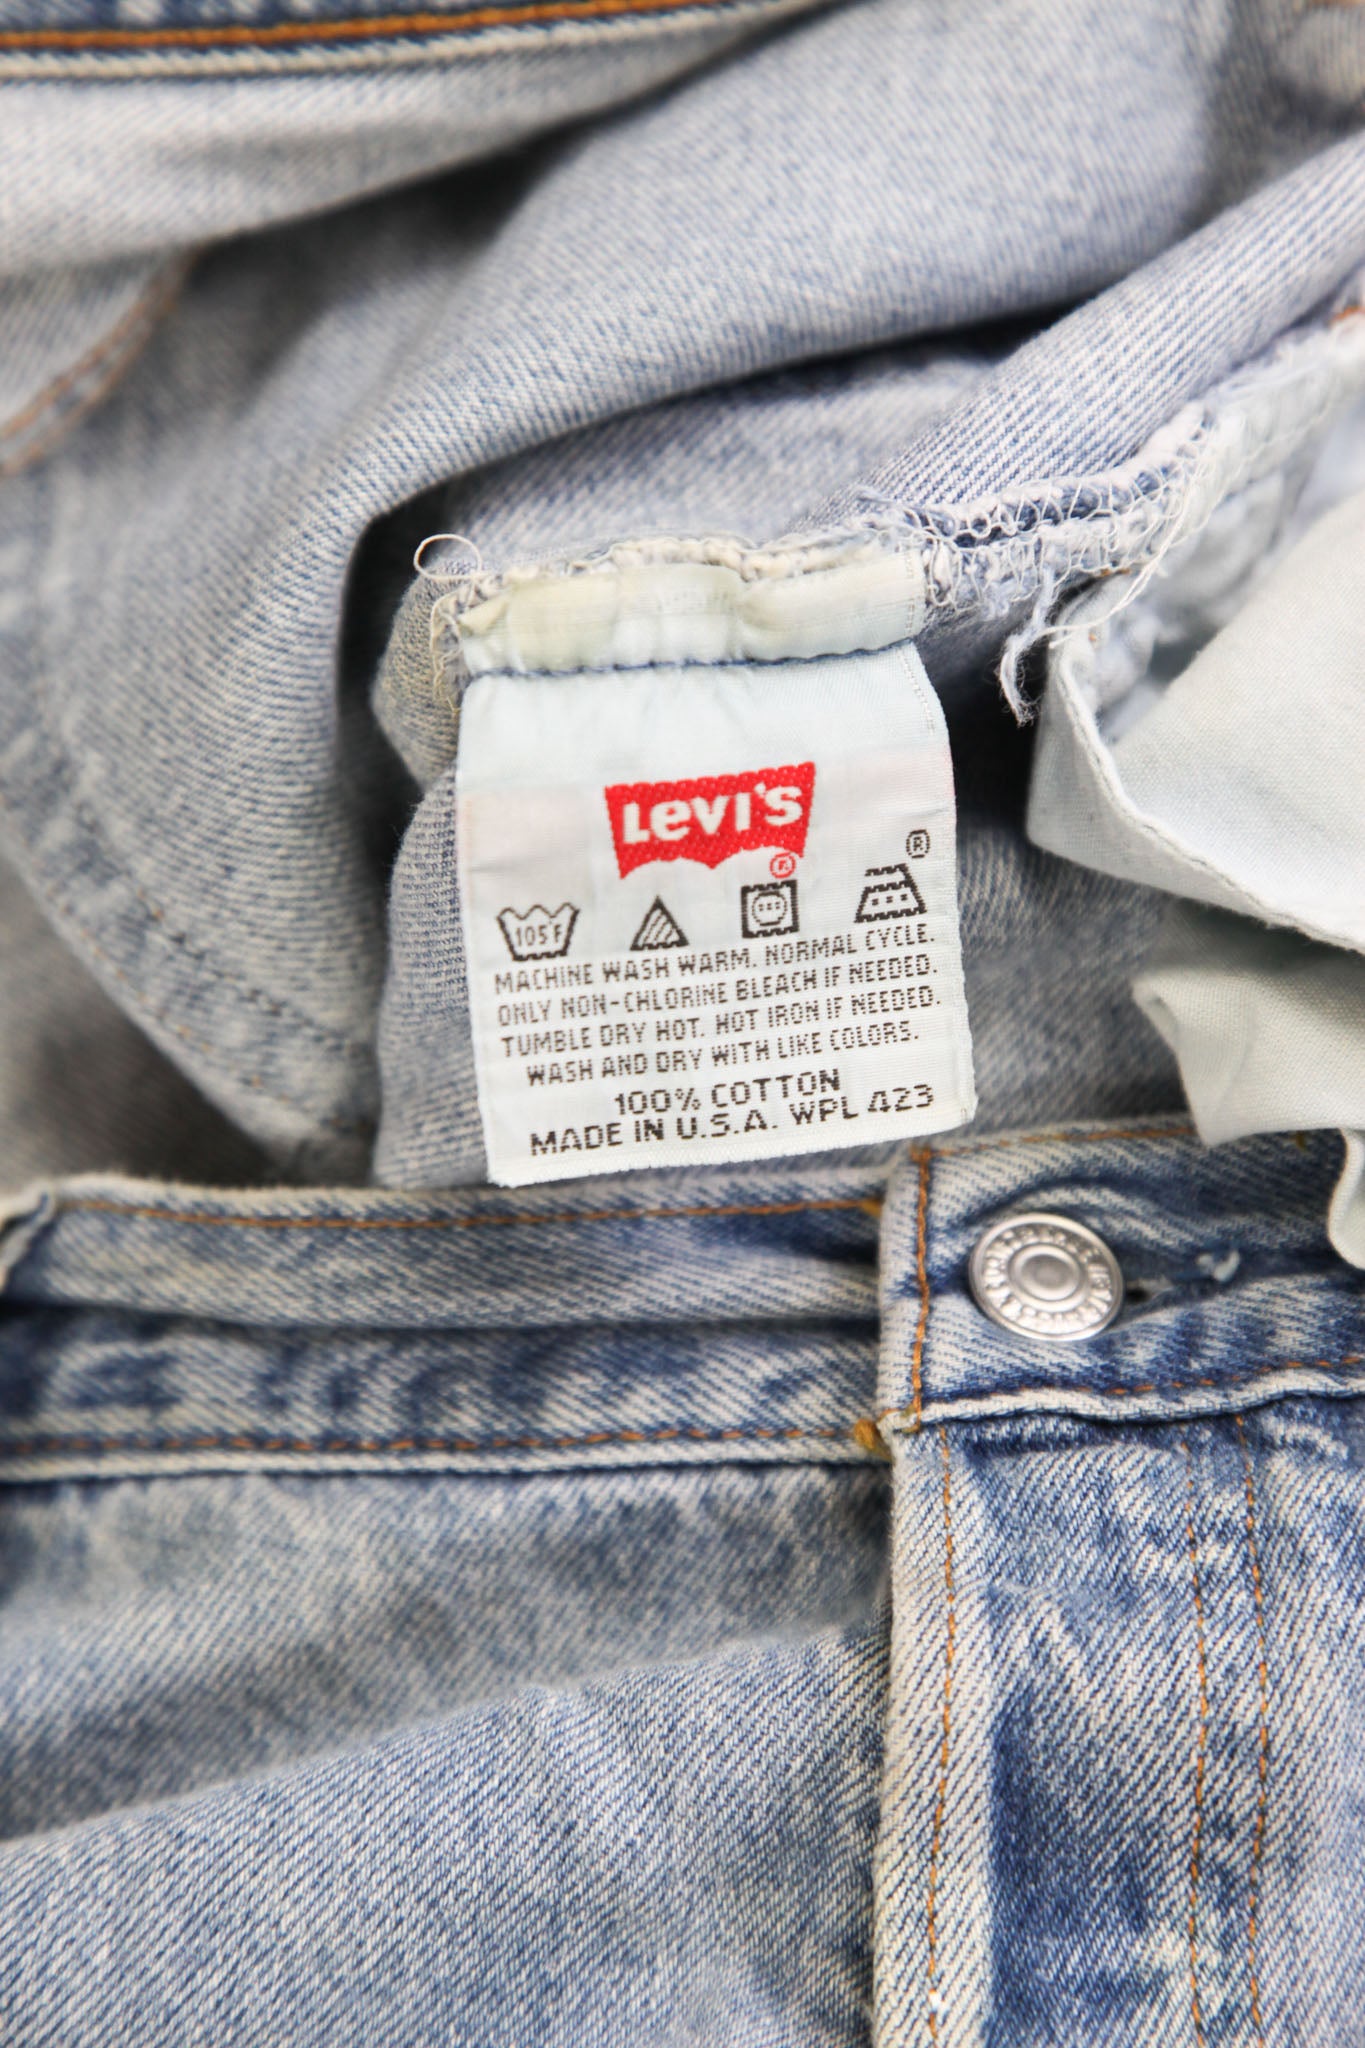 Made in USA Levi's 501 Light Wash Jeans (W42 L30) - Second